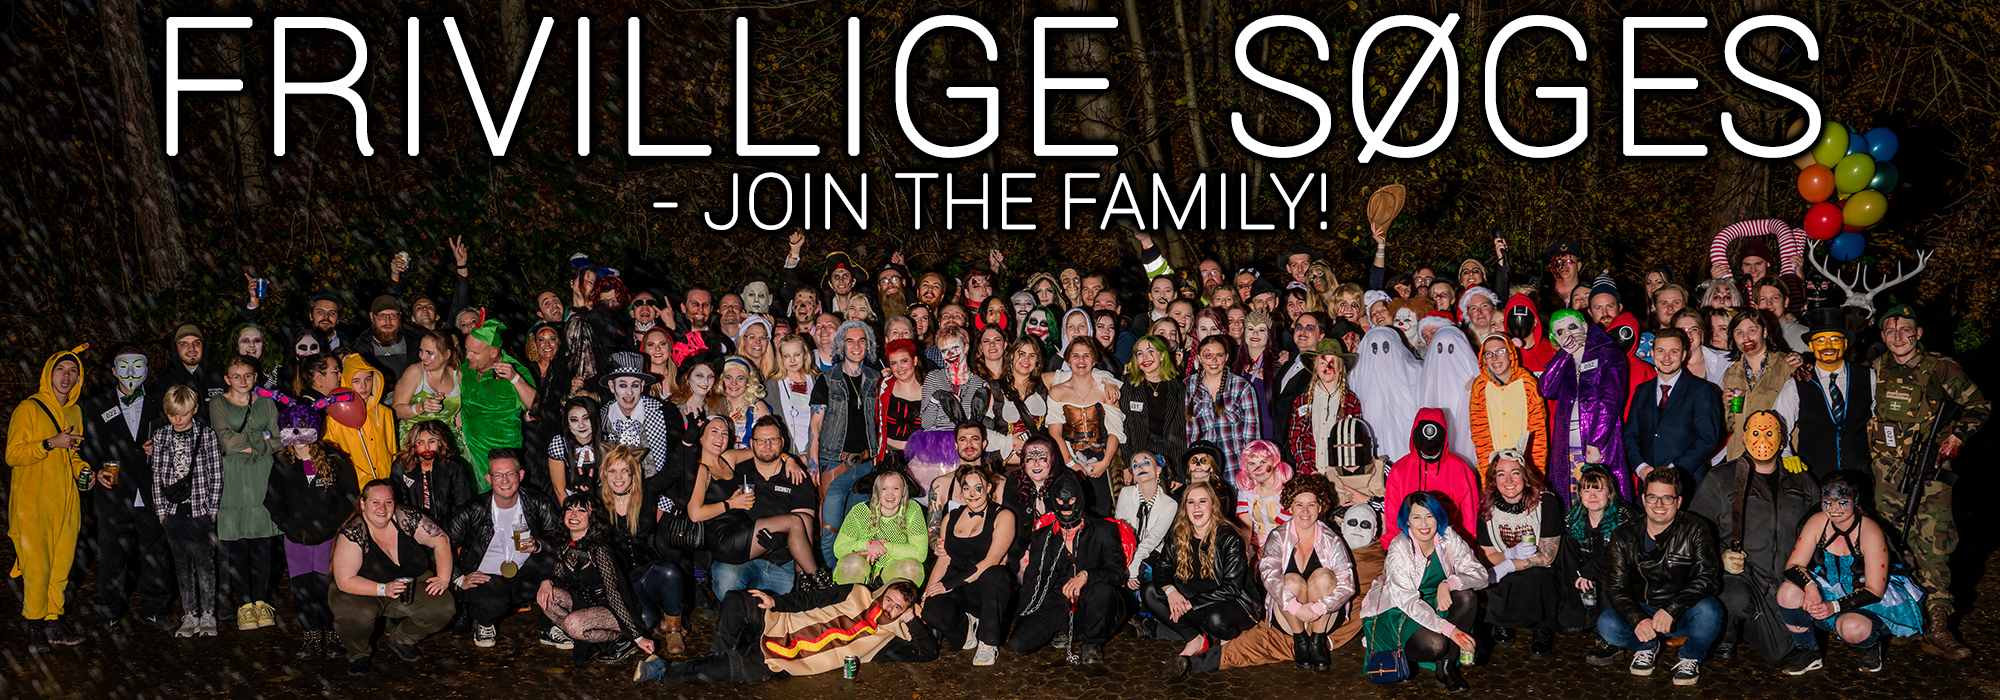 FRIVLLIGE SØGES - JOIN THE FAMILY